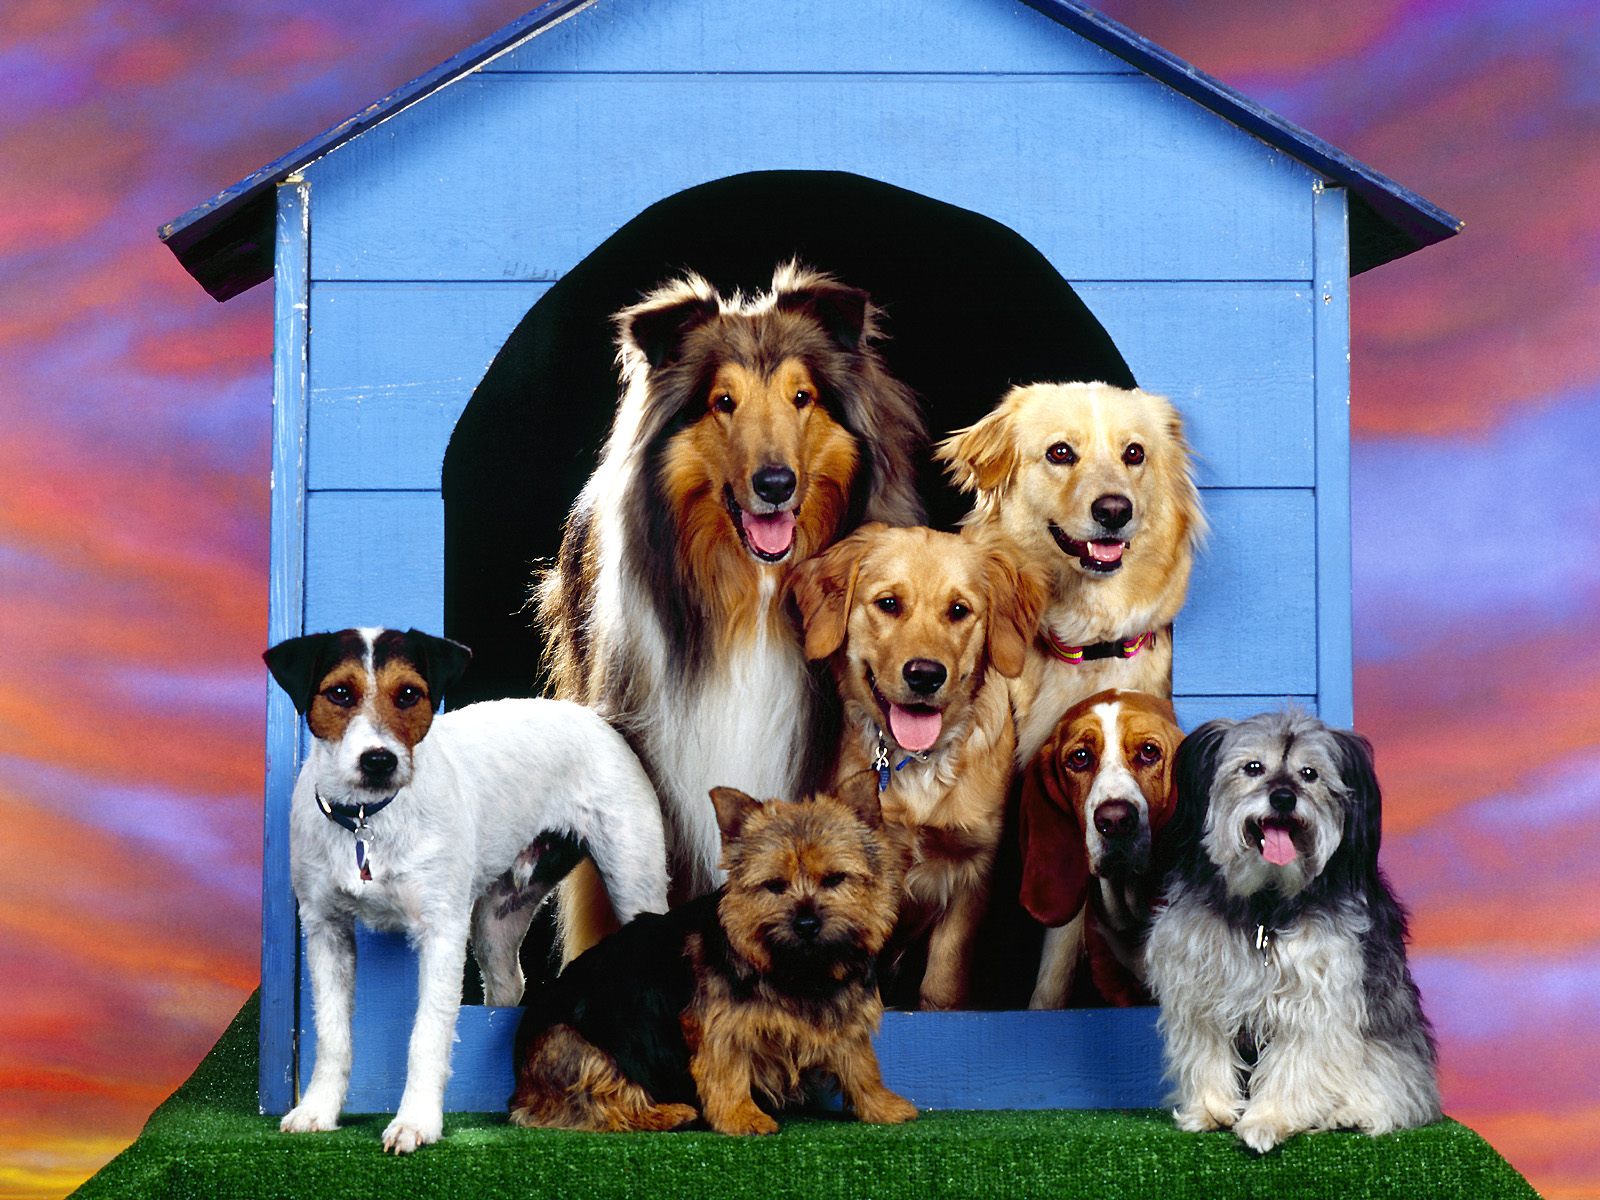 Dogs Family At Home Wallpaper Background On This